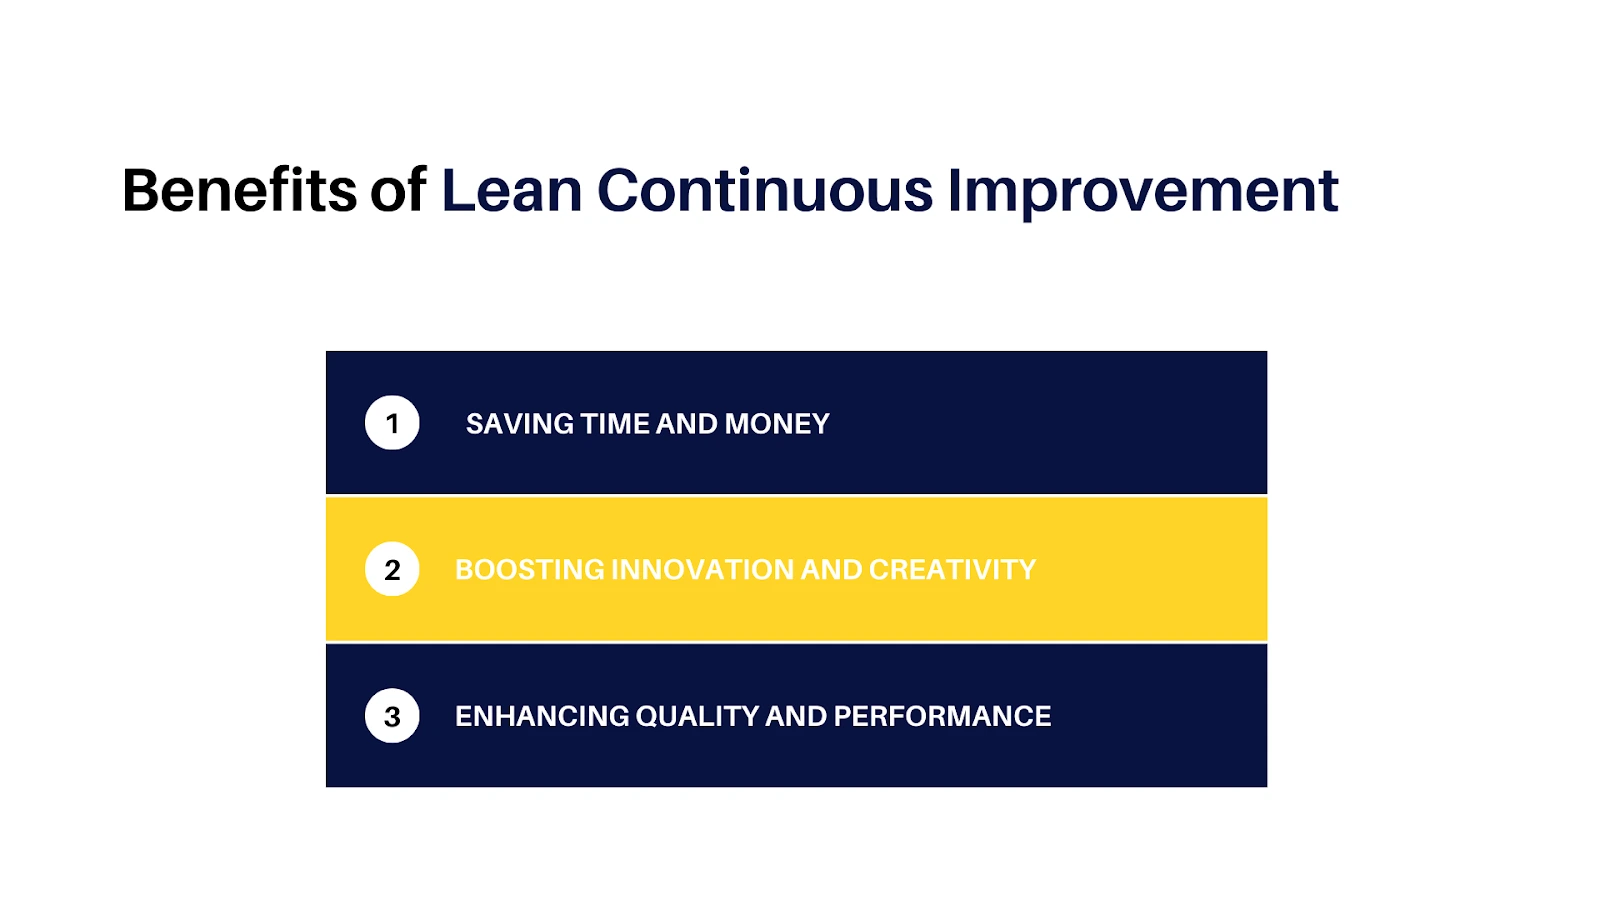 This Image Depicts Benefits of Lean Continuous Improvement